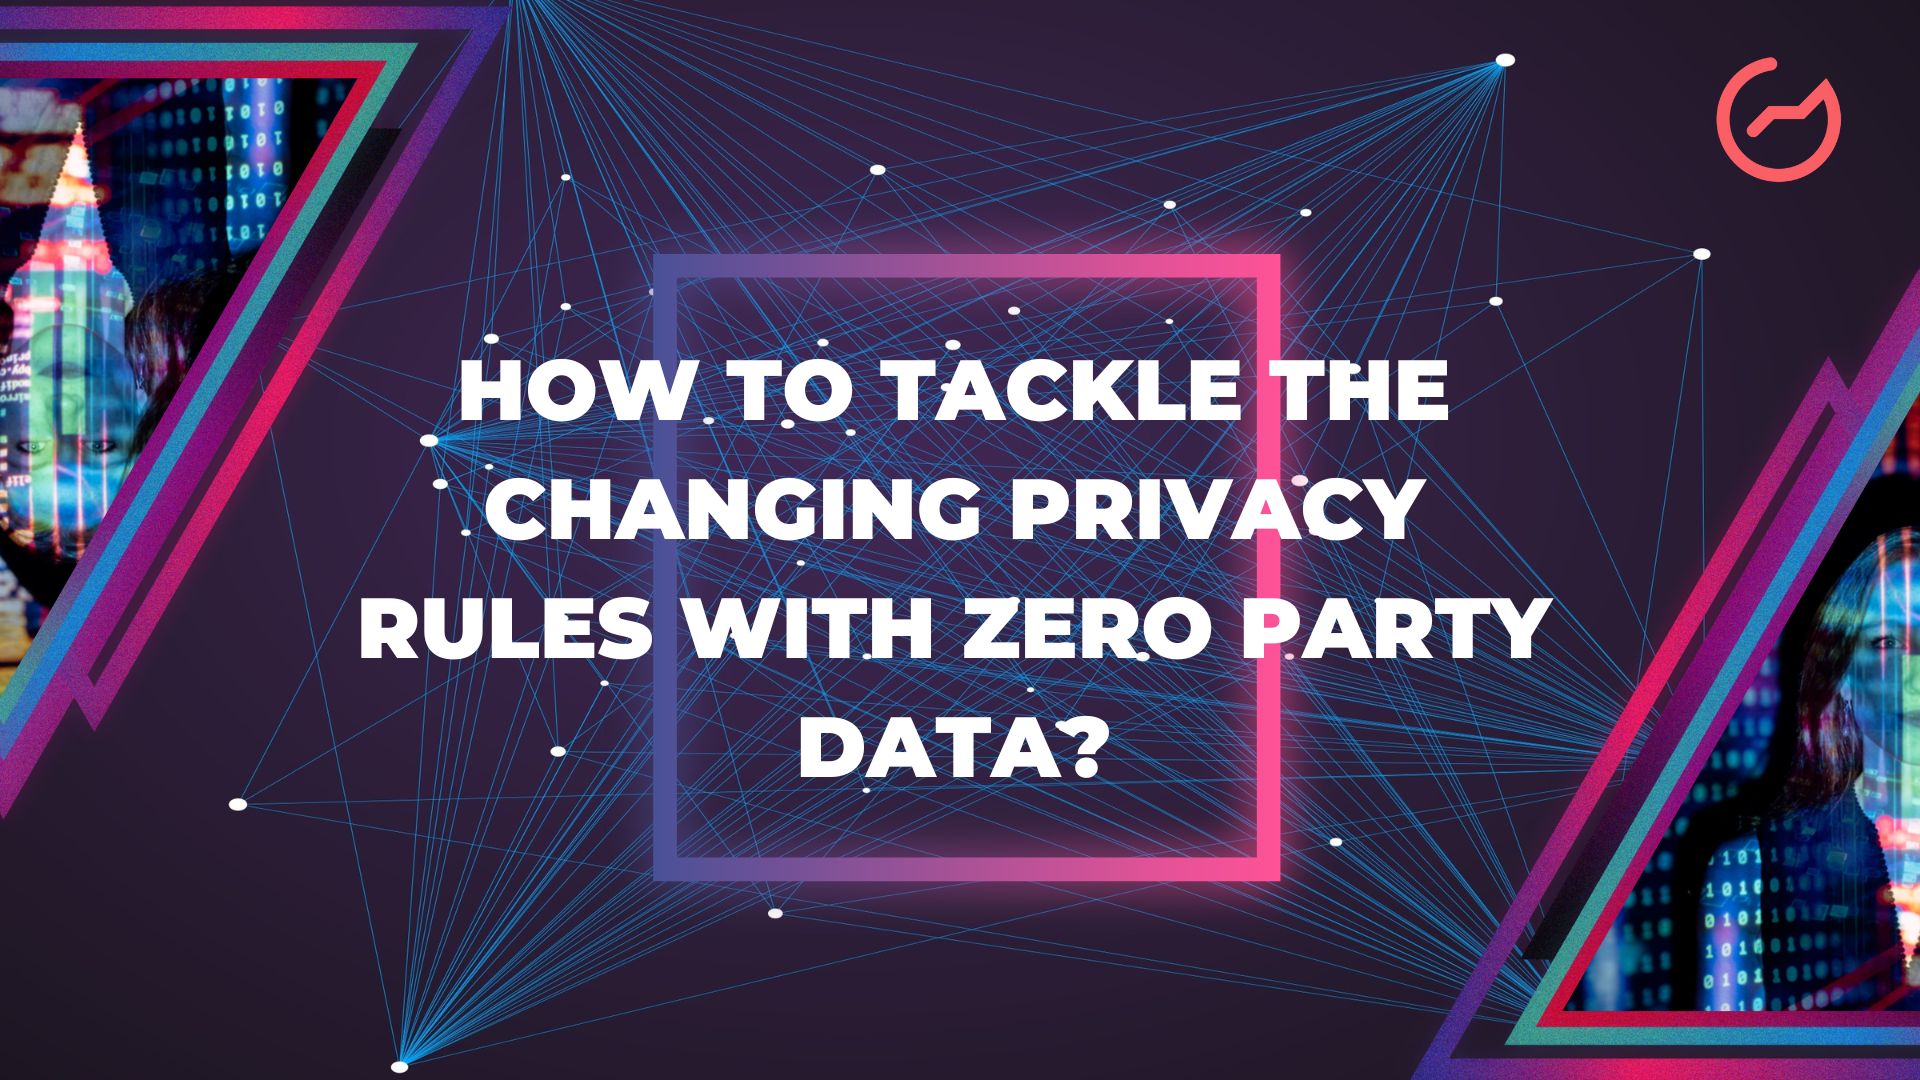 How to Tackle the Changing Privacy Rules With Zero Party Data